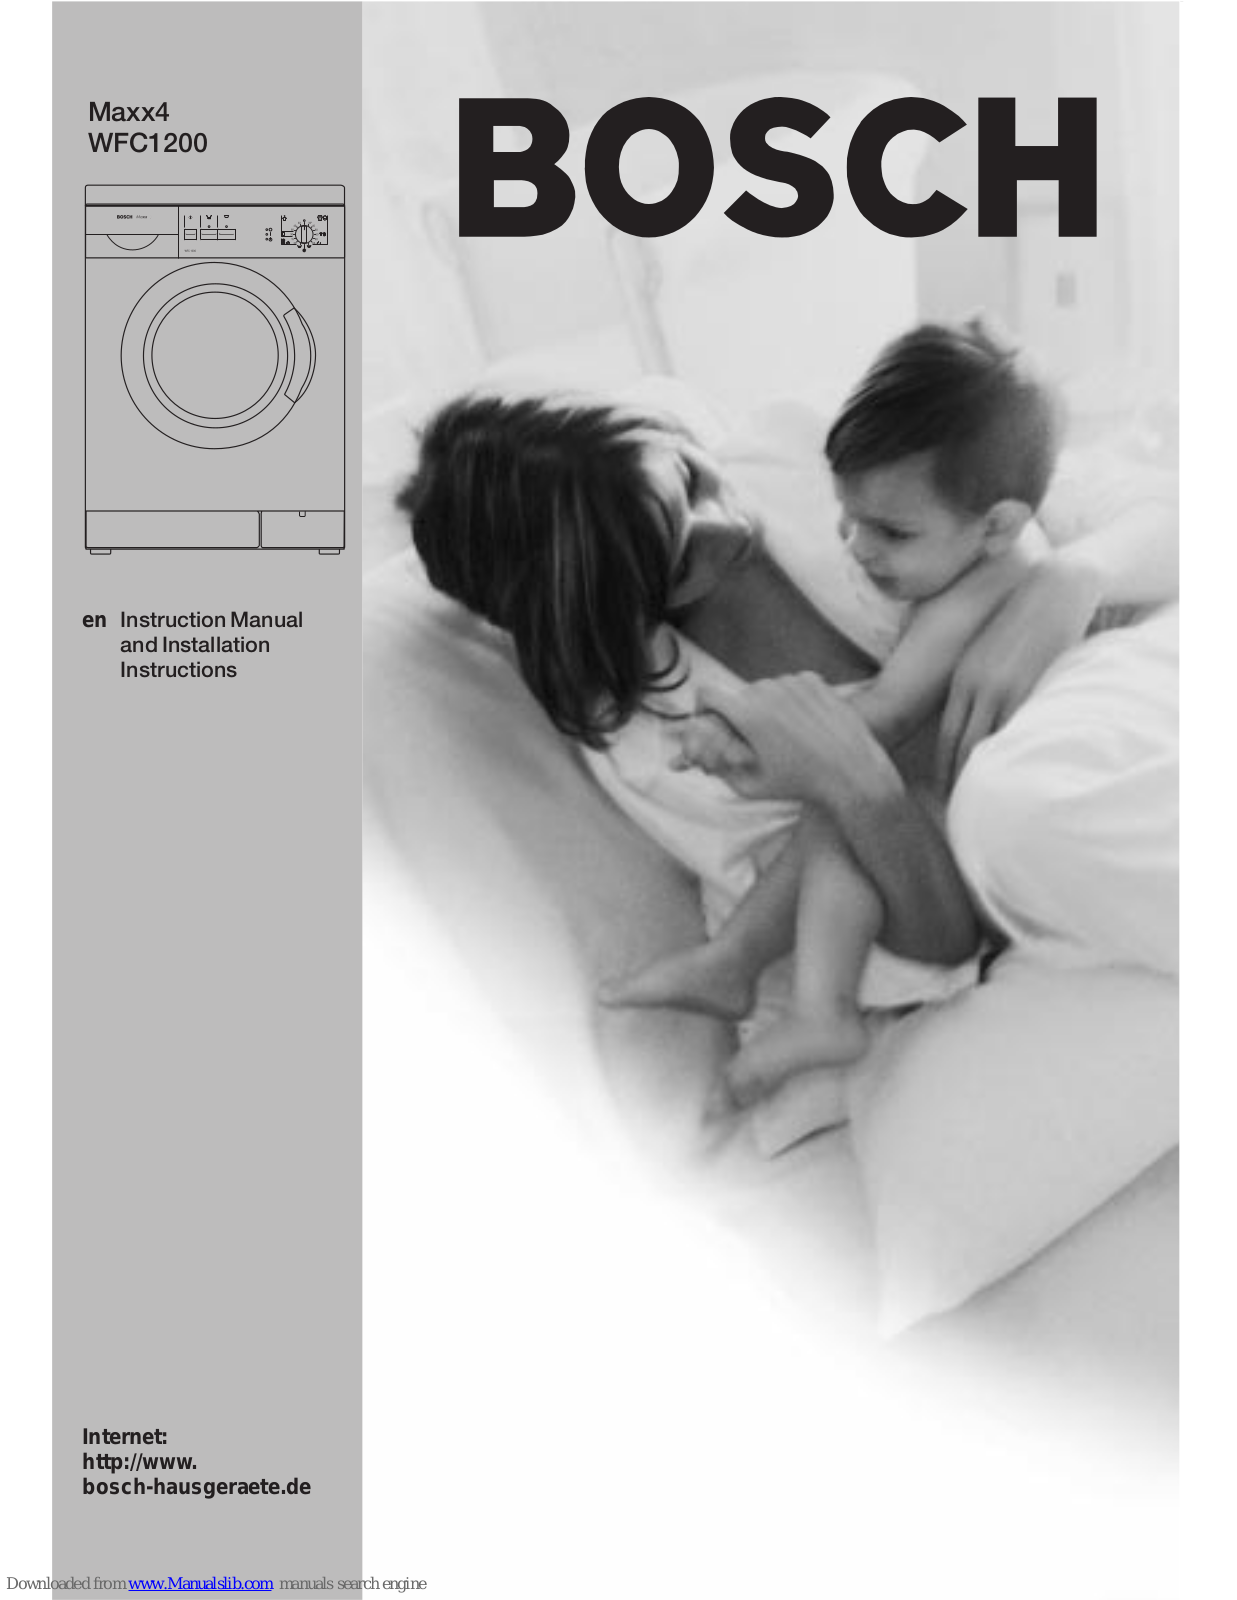 Bosch Maxx4 WFC1200 Instruction Manual And Installation Instructions